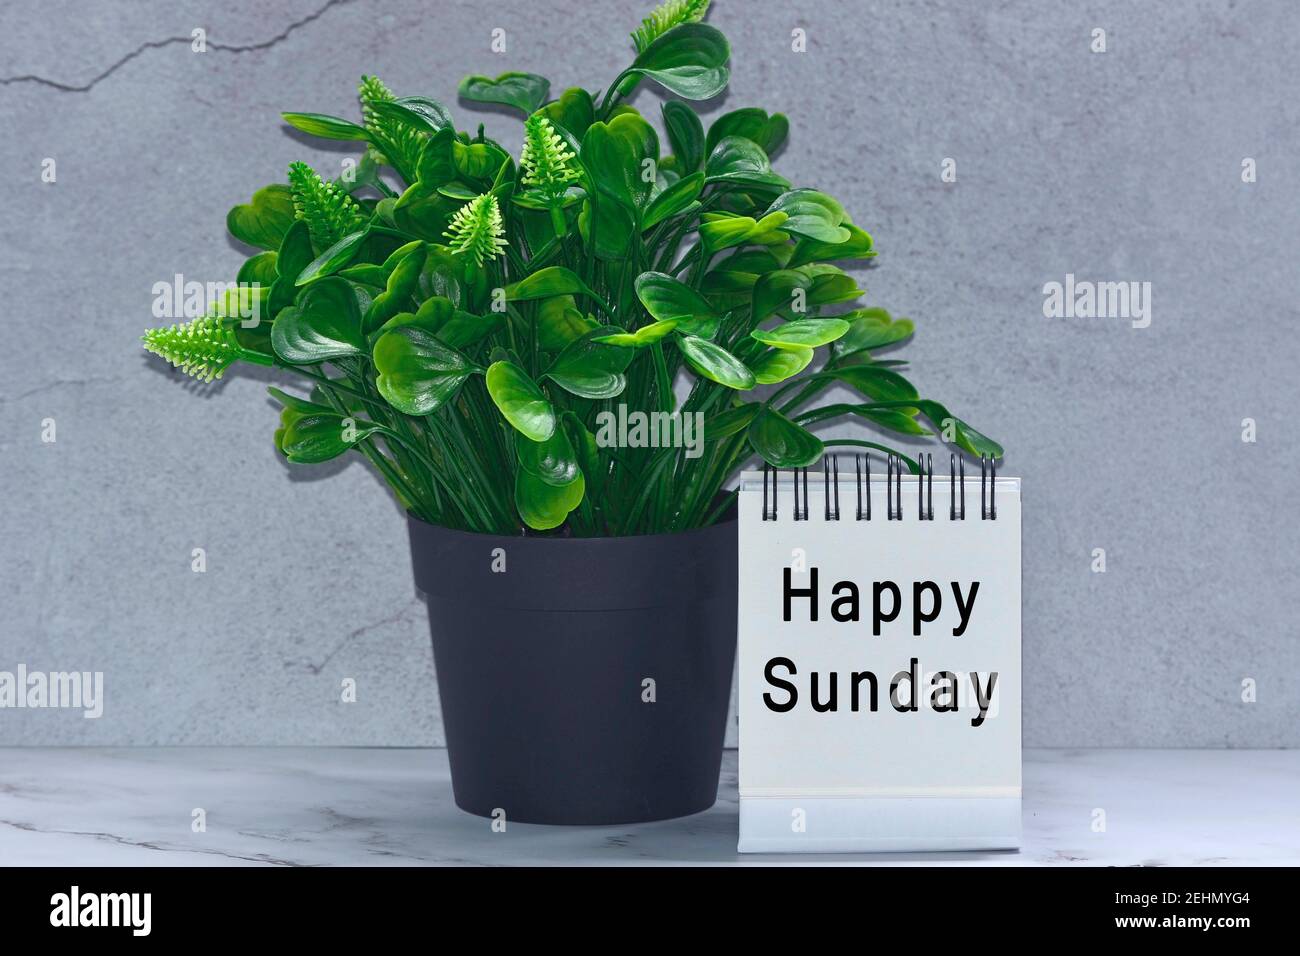 Text on white stand paper with green plant background  Stock Photo